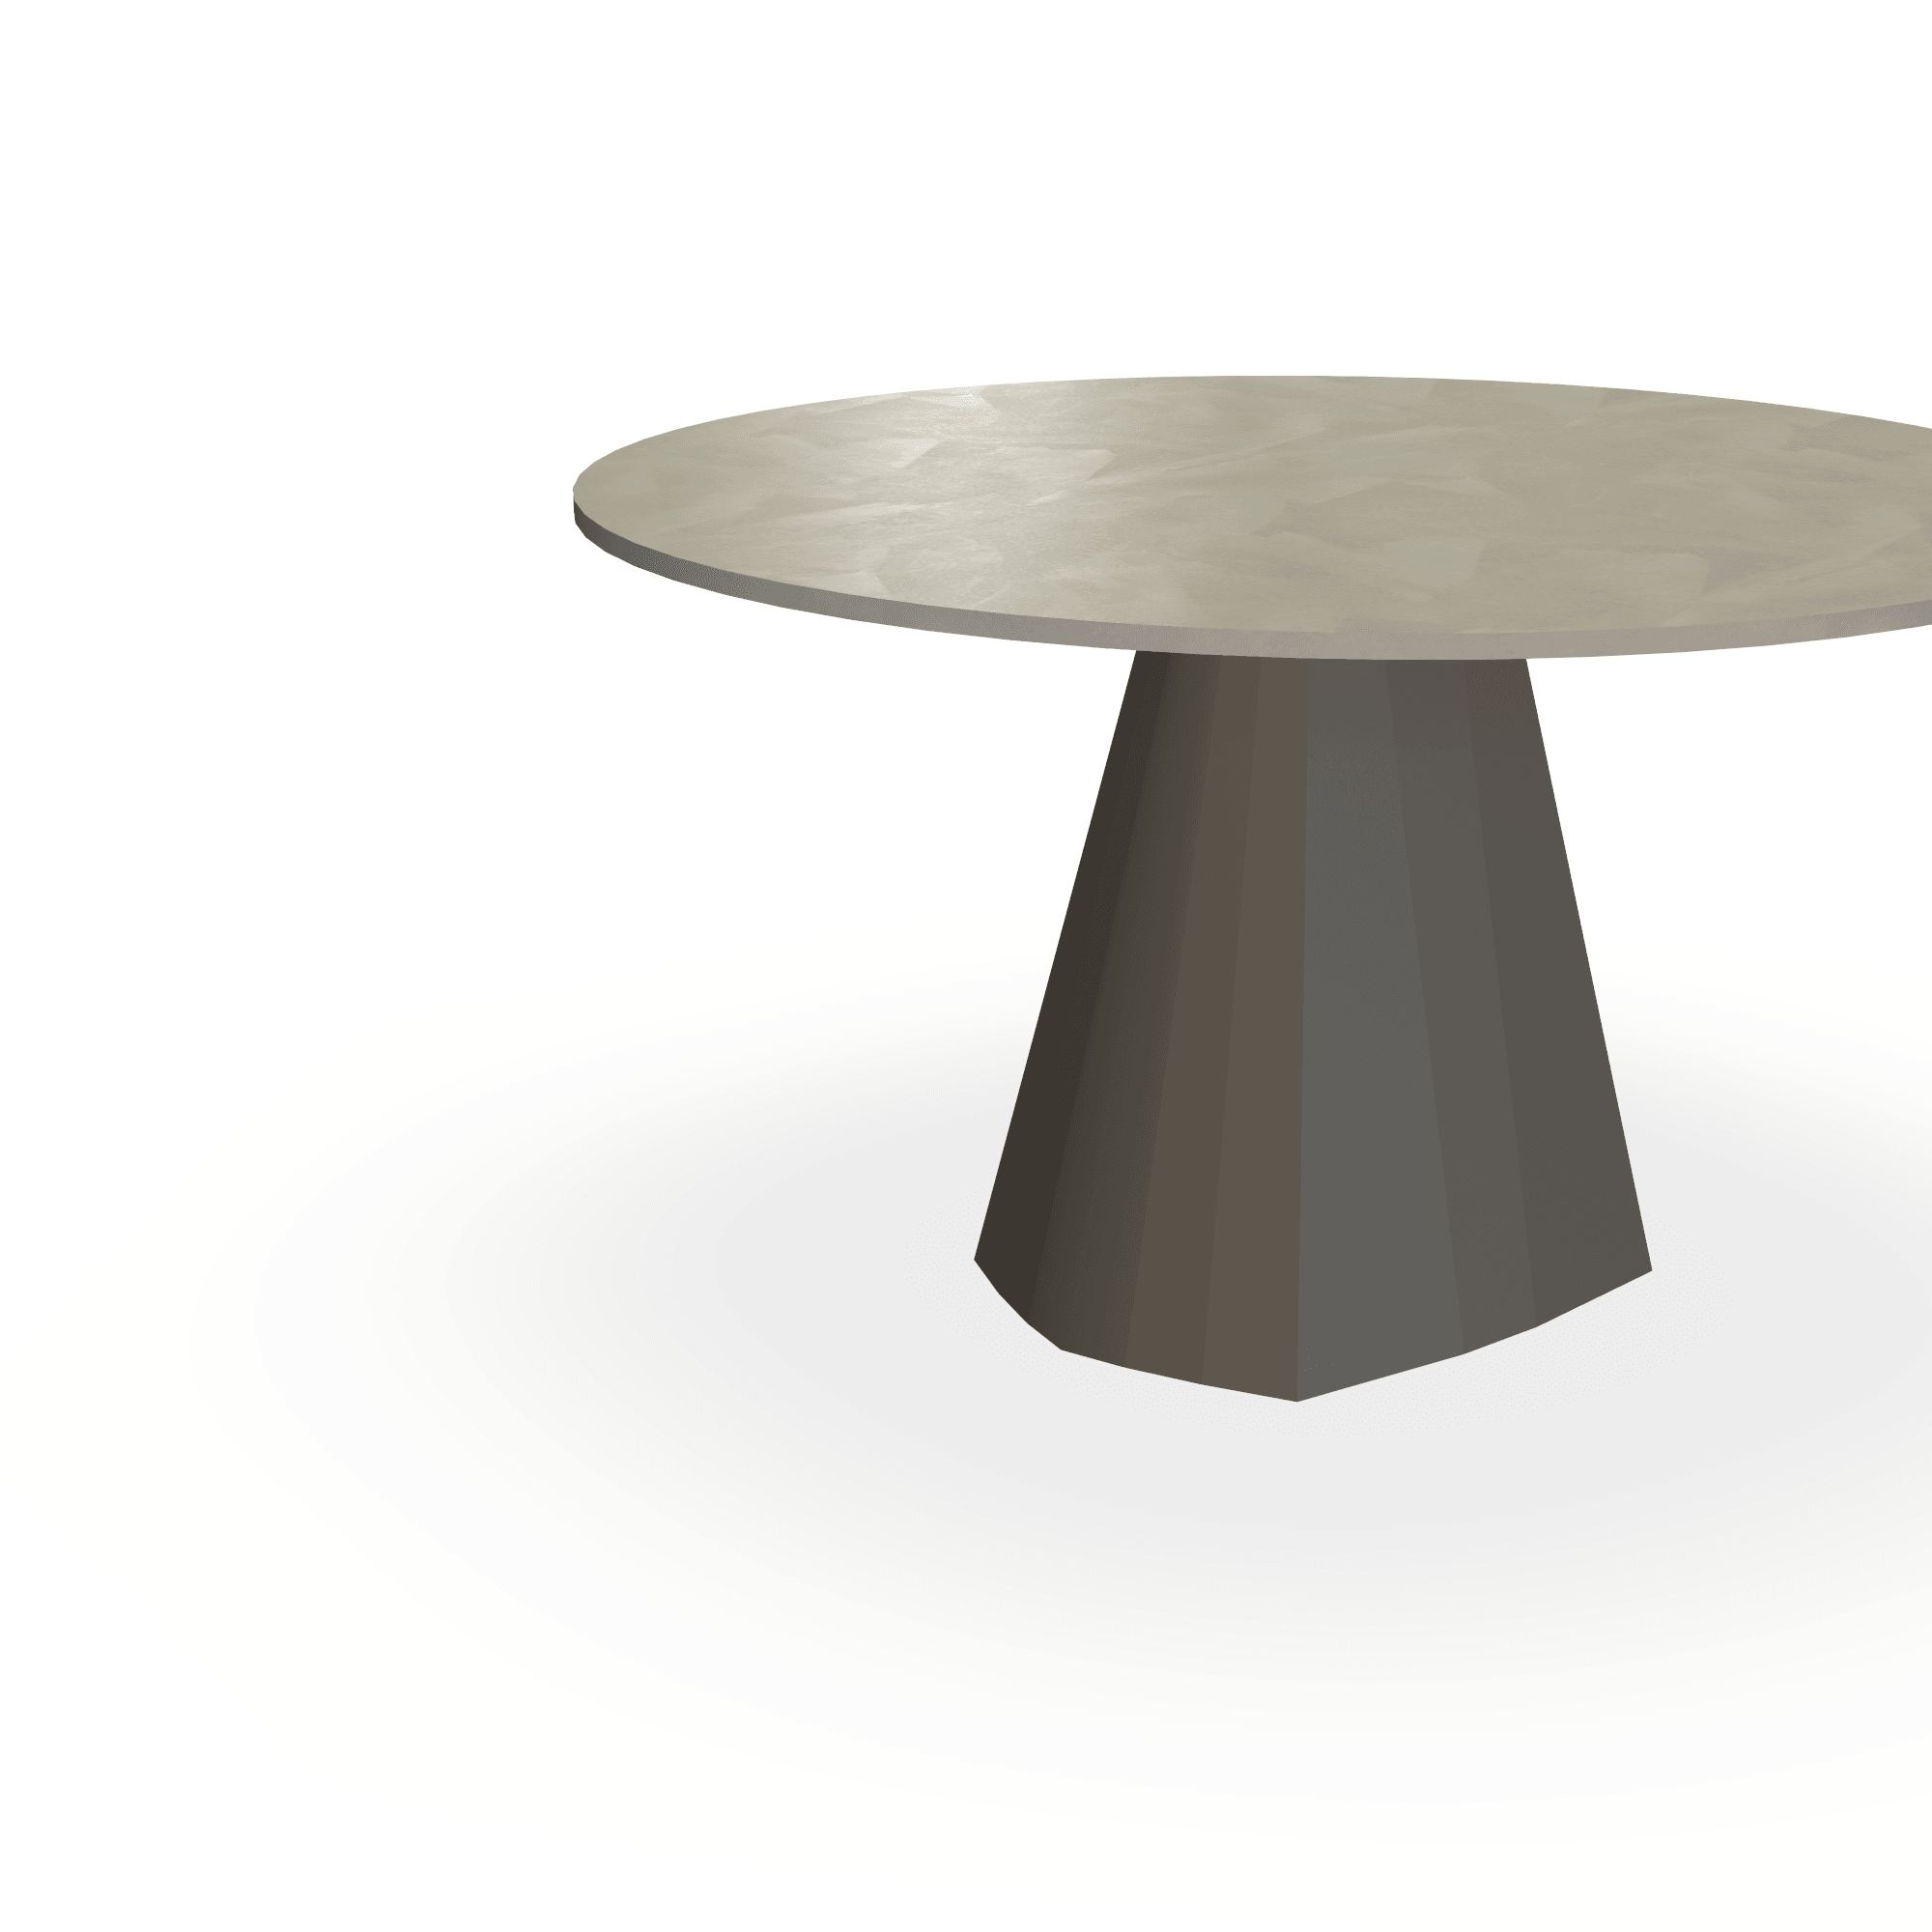 Eettafel Beton Leather Taupe - Rond - Cone Onderstel Mat Donkerbruin - {{ product.type }} - Kas20